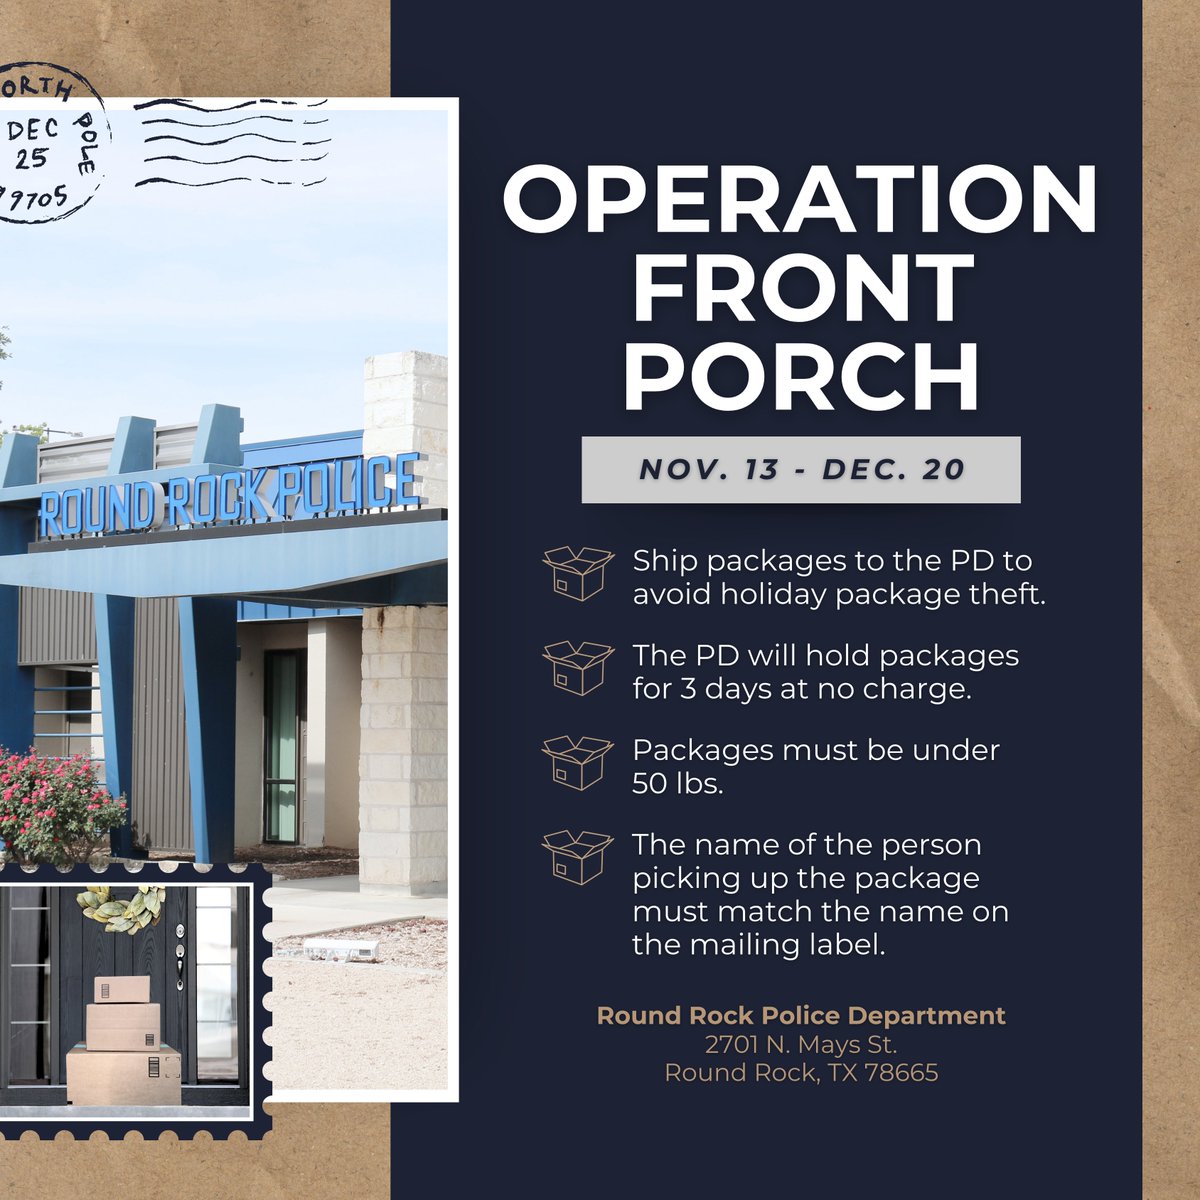 BREAKING: Operation Front Porch is in full swing!📦 Protect your packages this holiday season by shipping them to the Round Rock Police Department. We will be accepting packages until Dec. 20. For more info, visit bit.ly/RRPDOperationF…. #OperationFrontPorch